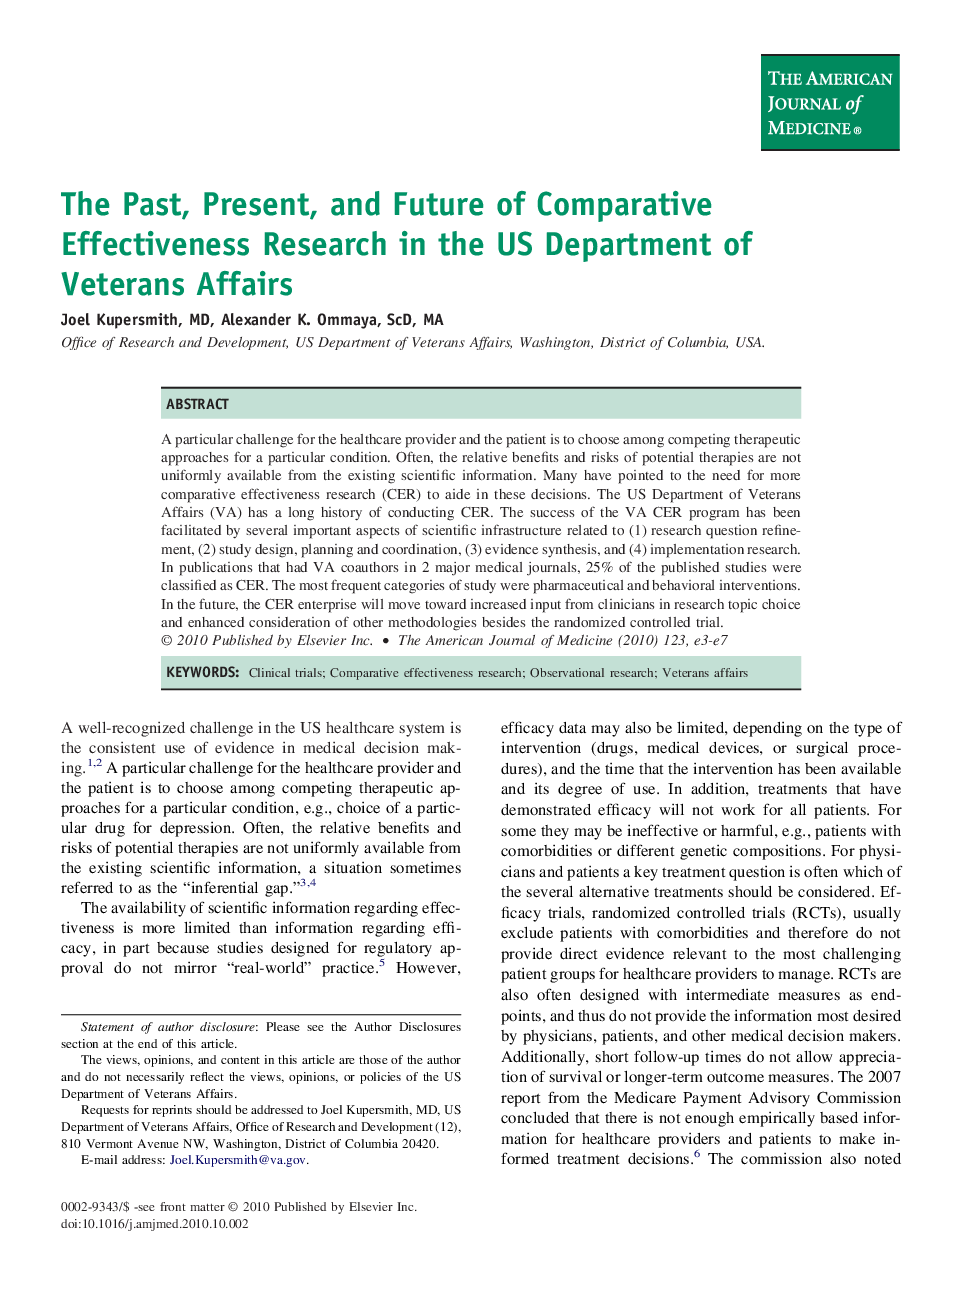 The Past, Present, and Future of Comparative Effectiveness Research in the US Department of Veterans Affairs 